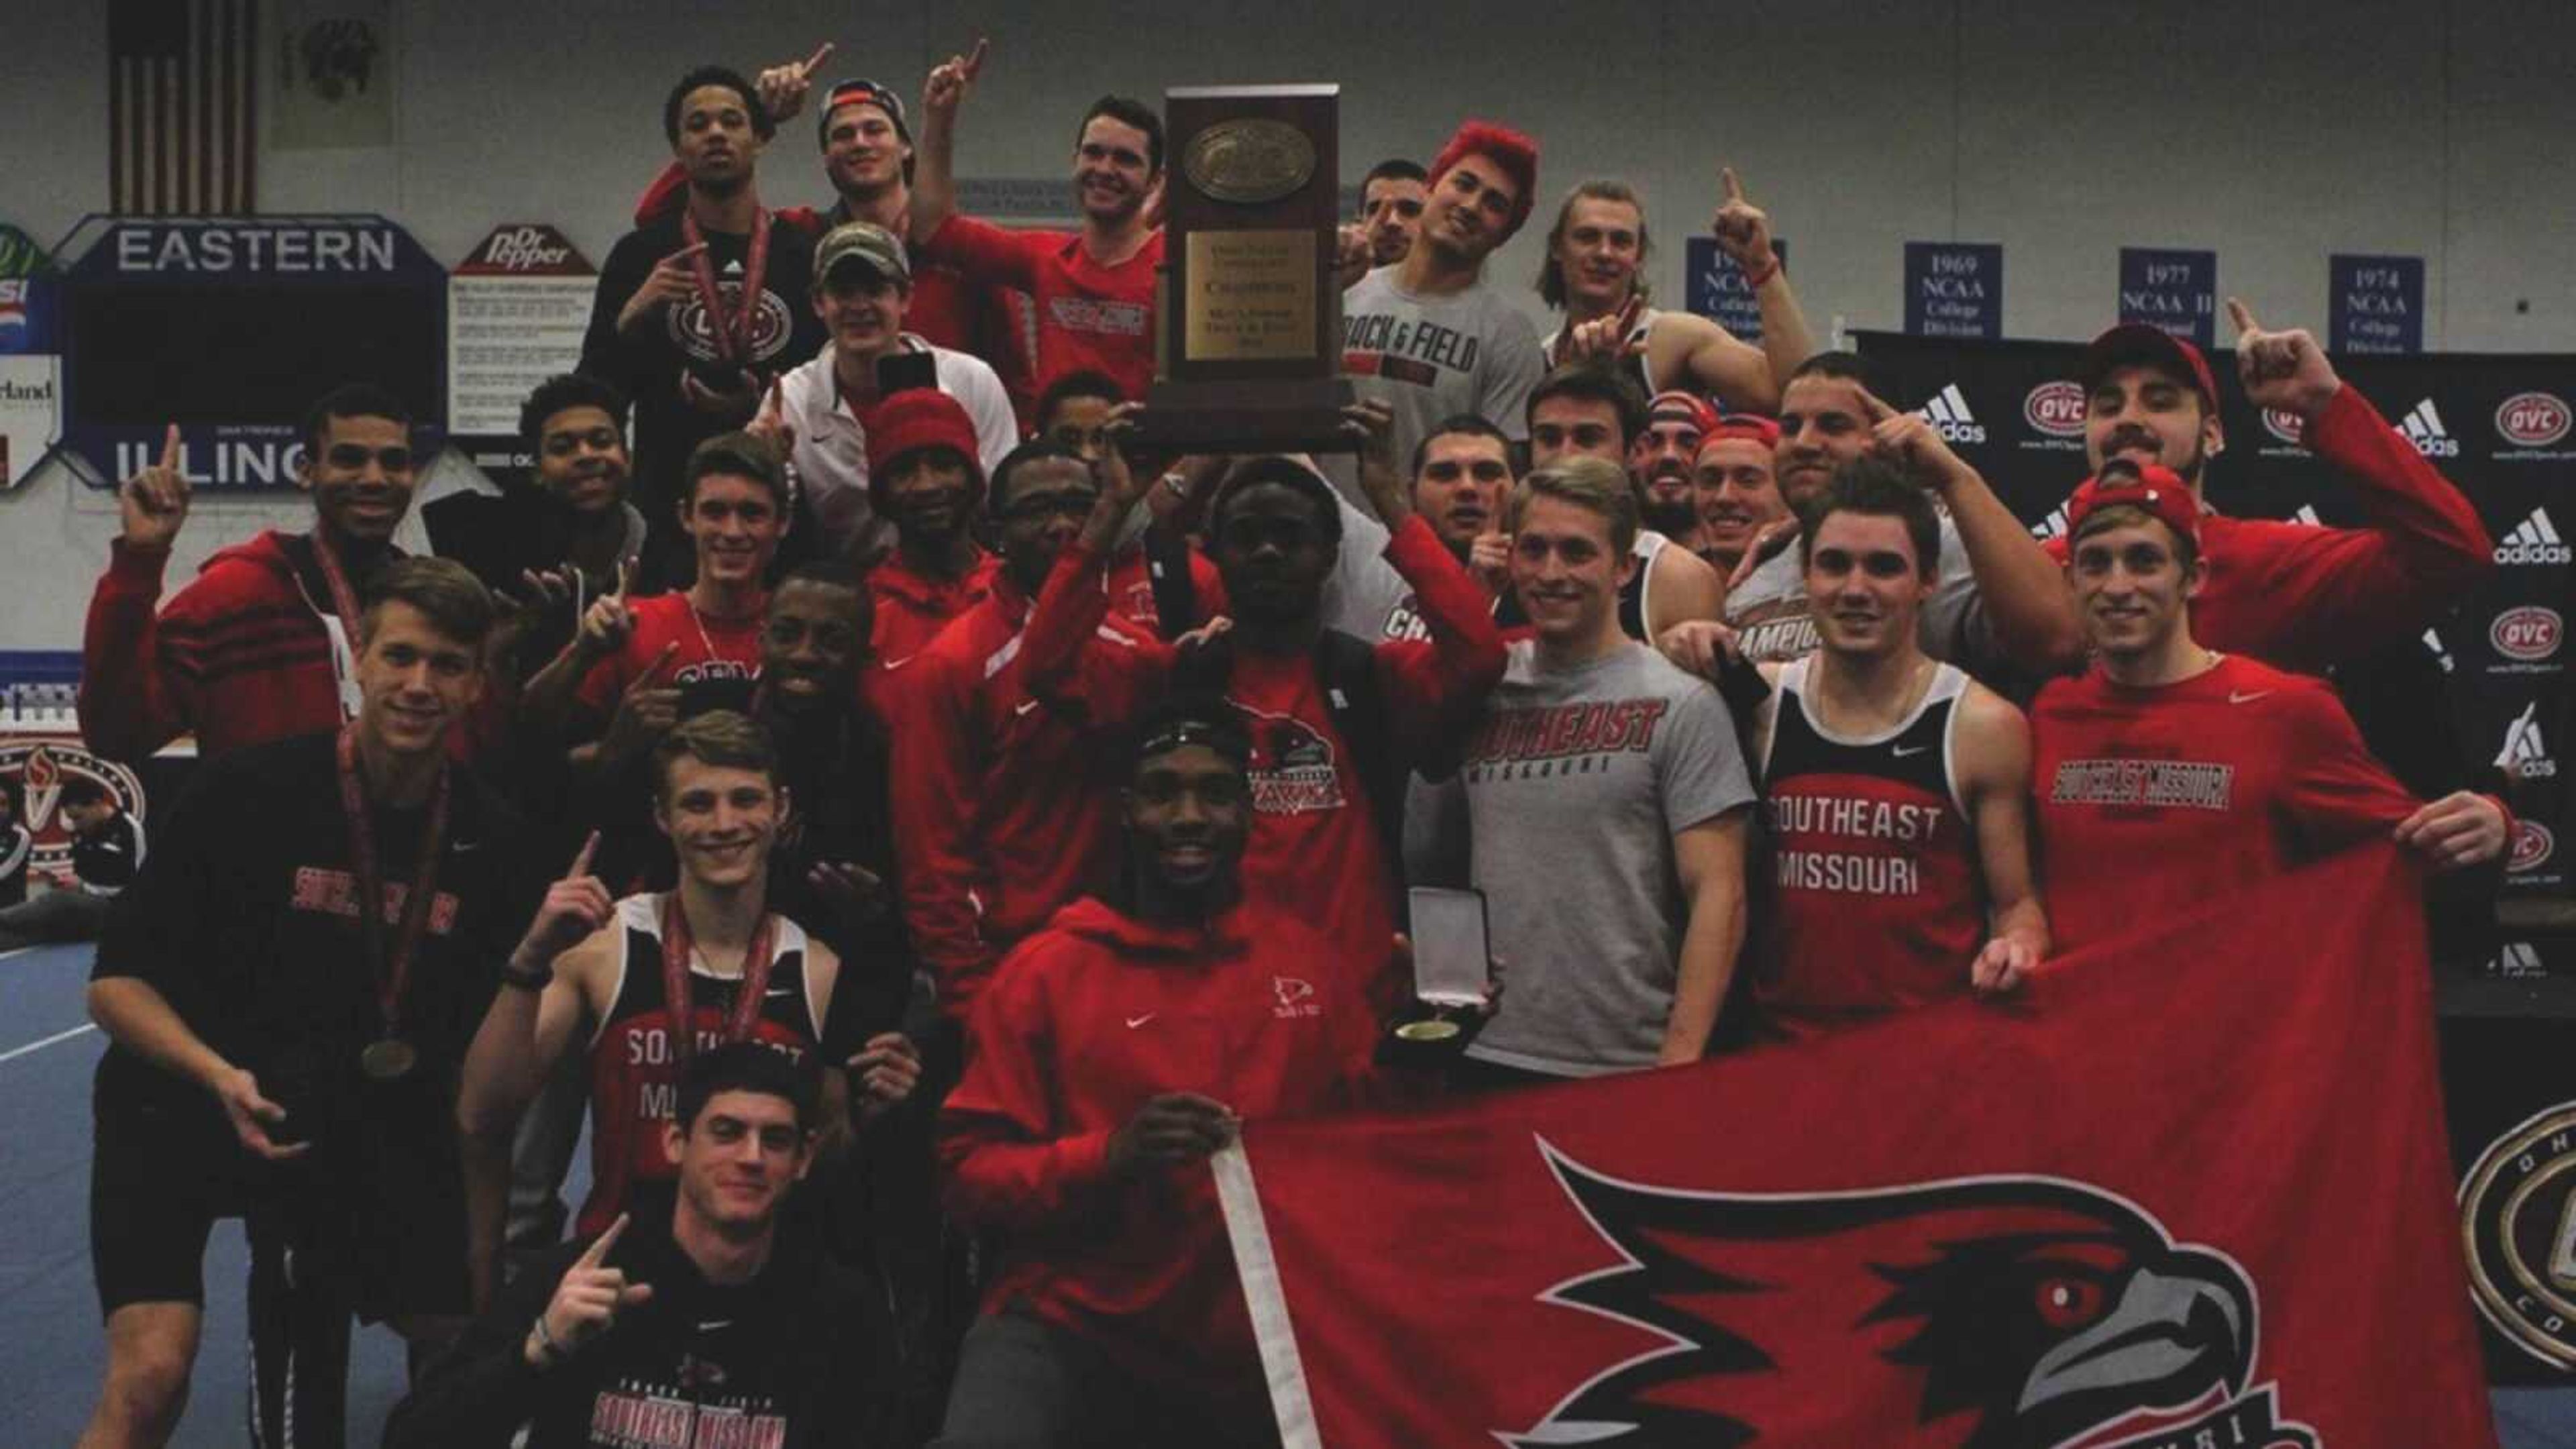 Track teams working hard to repeat past success